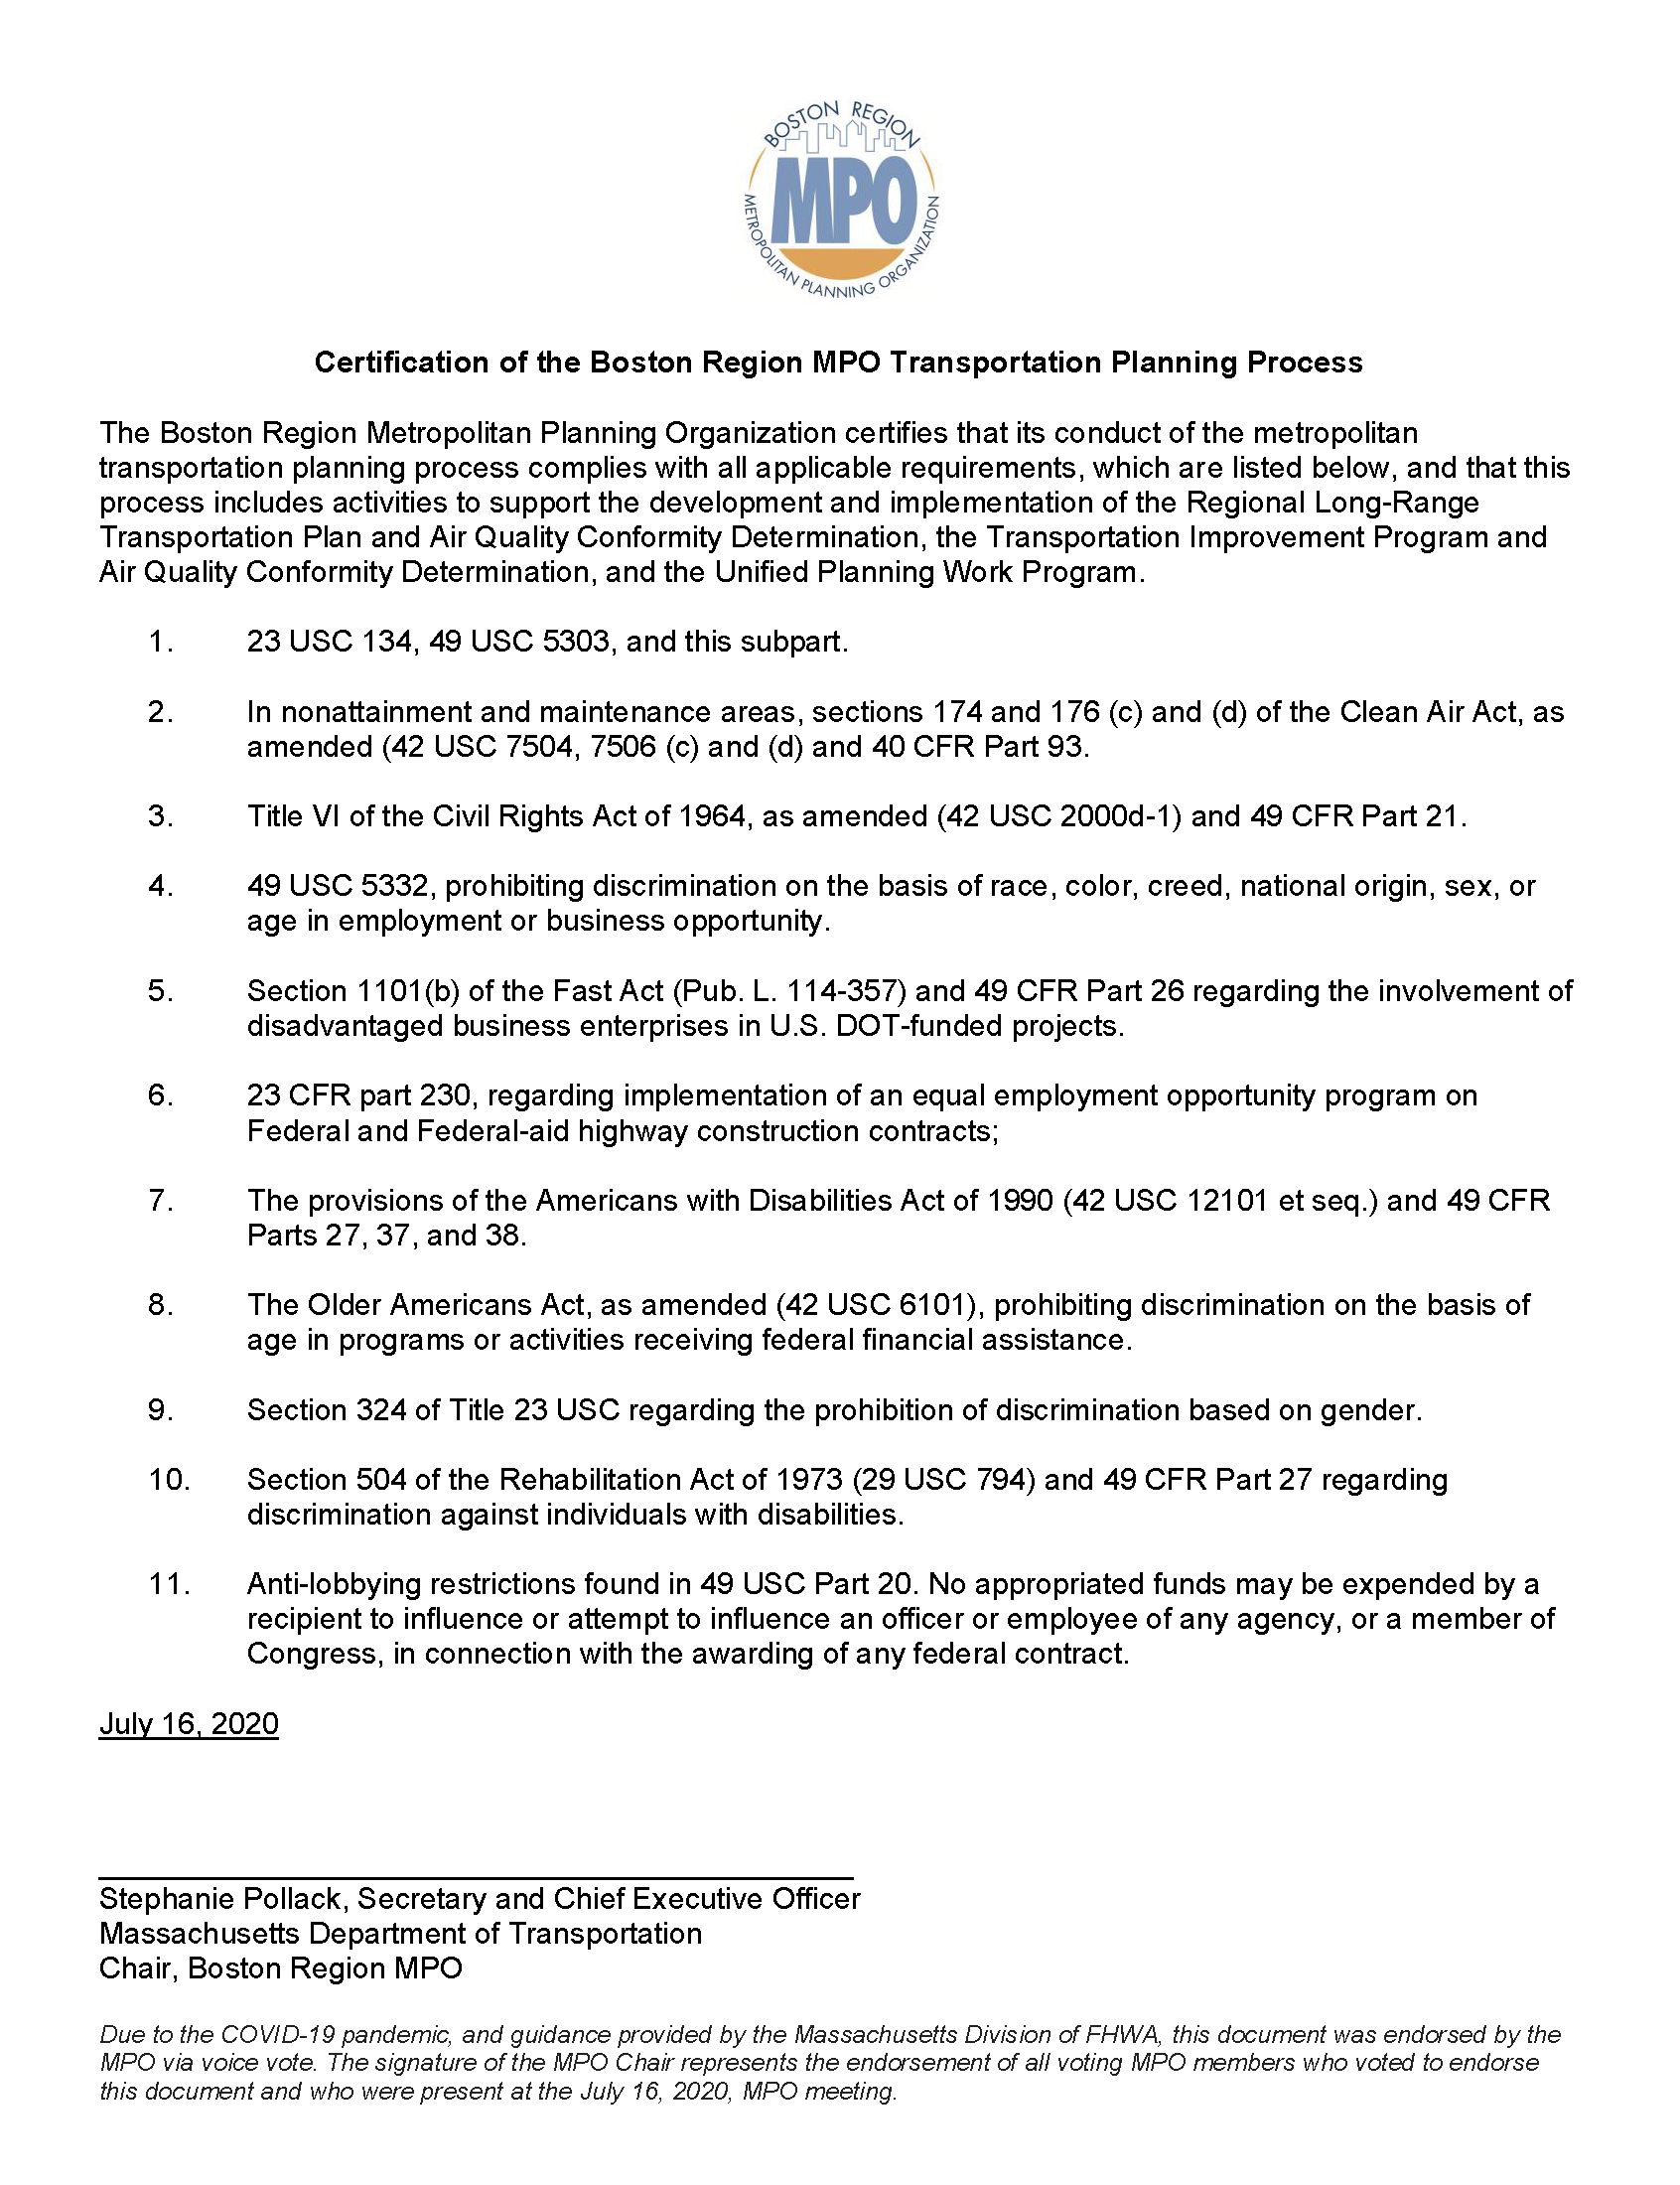 Certification of the Boston Region MPO Transportation Plannning Process, Page 1 of 1.